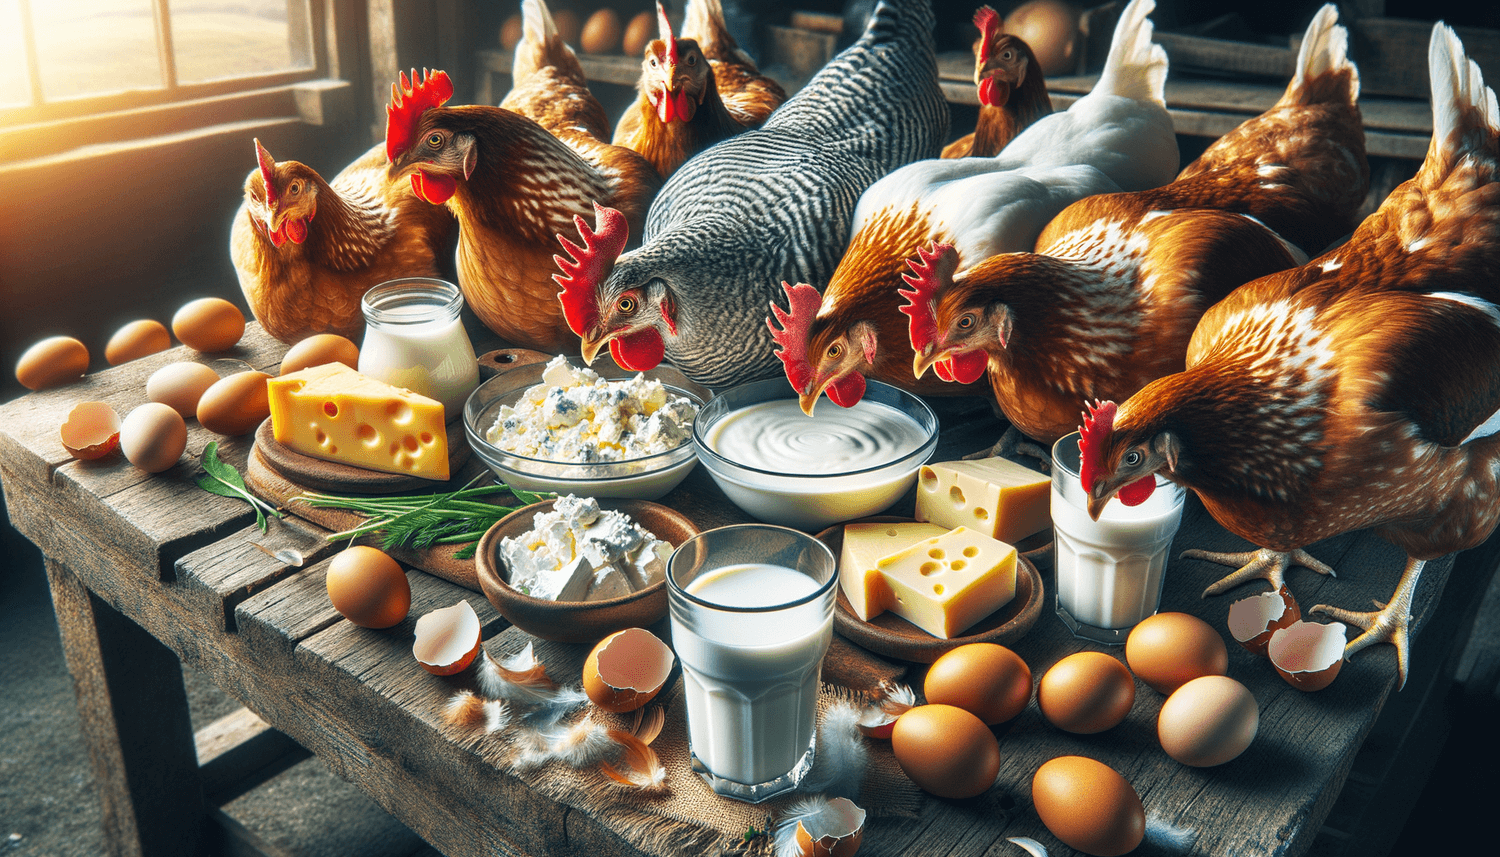 Can Chickens Eat Dairy Products?